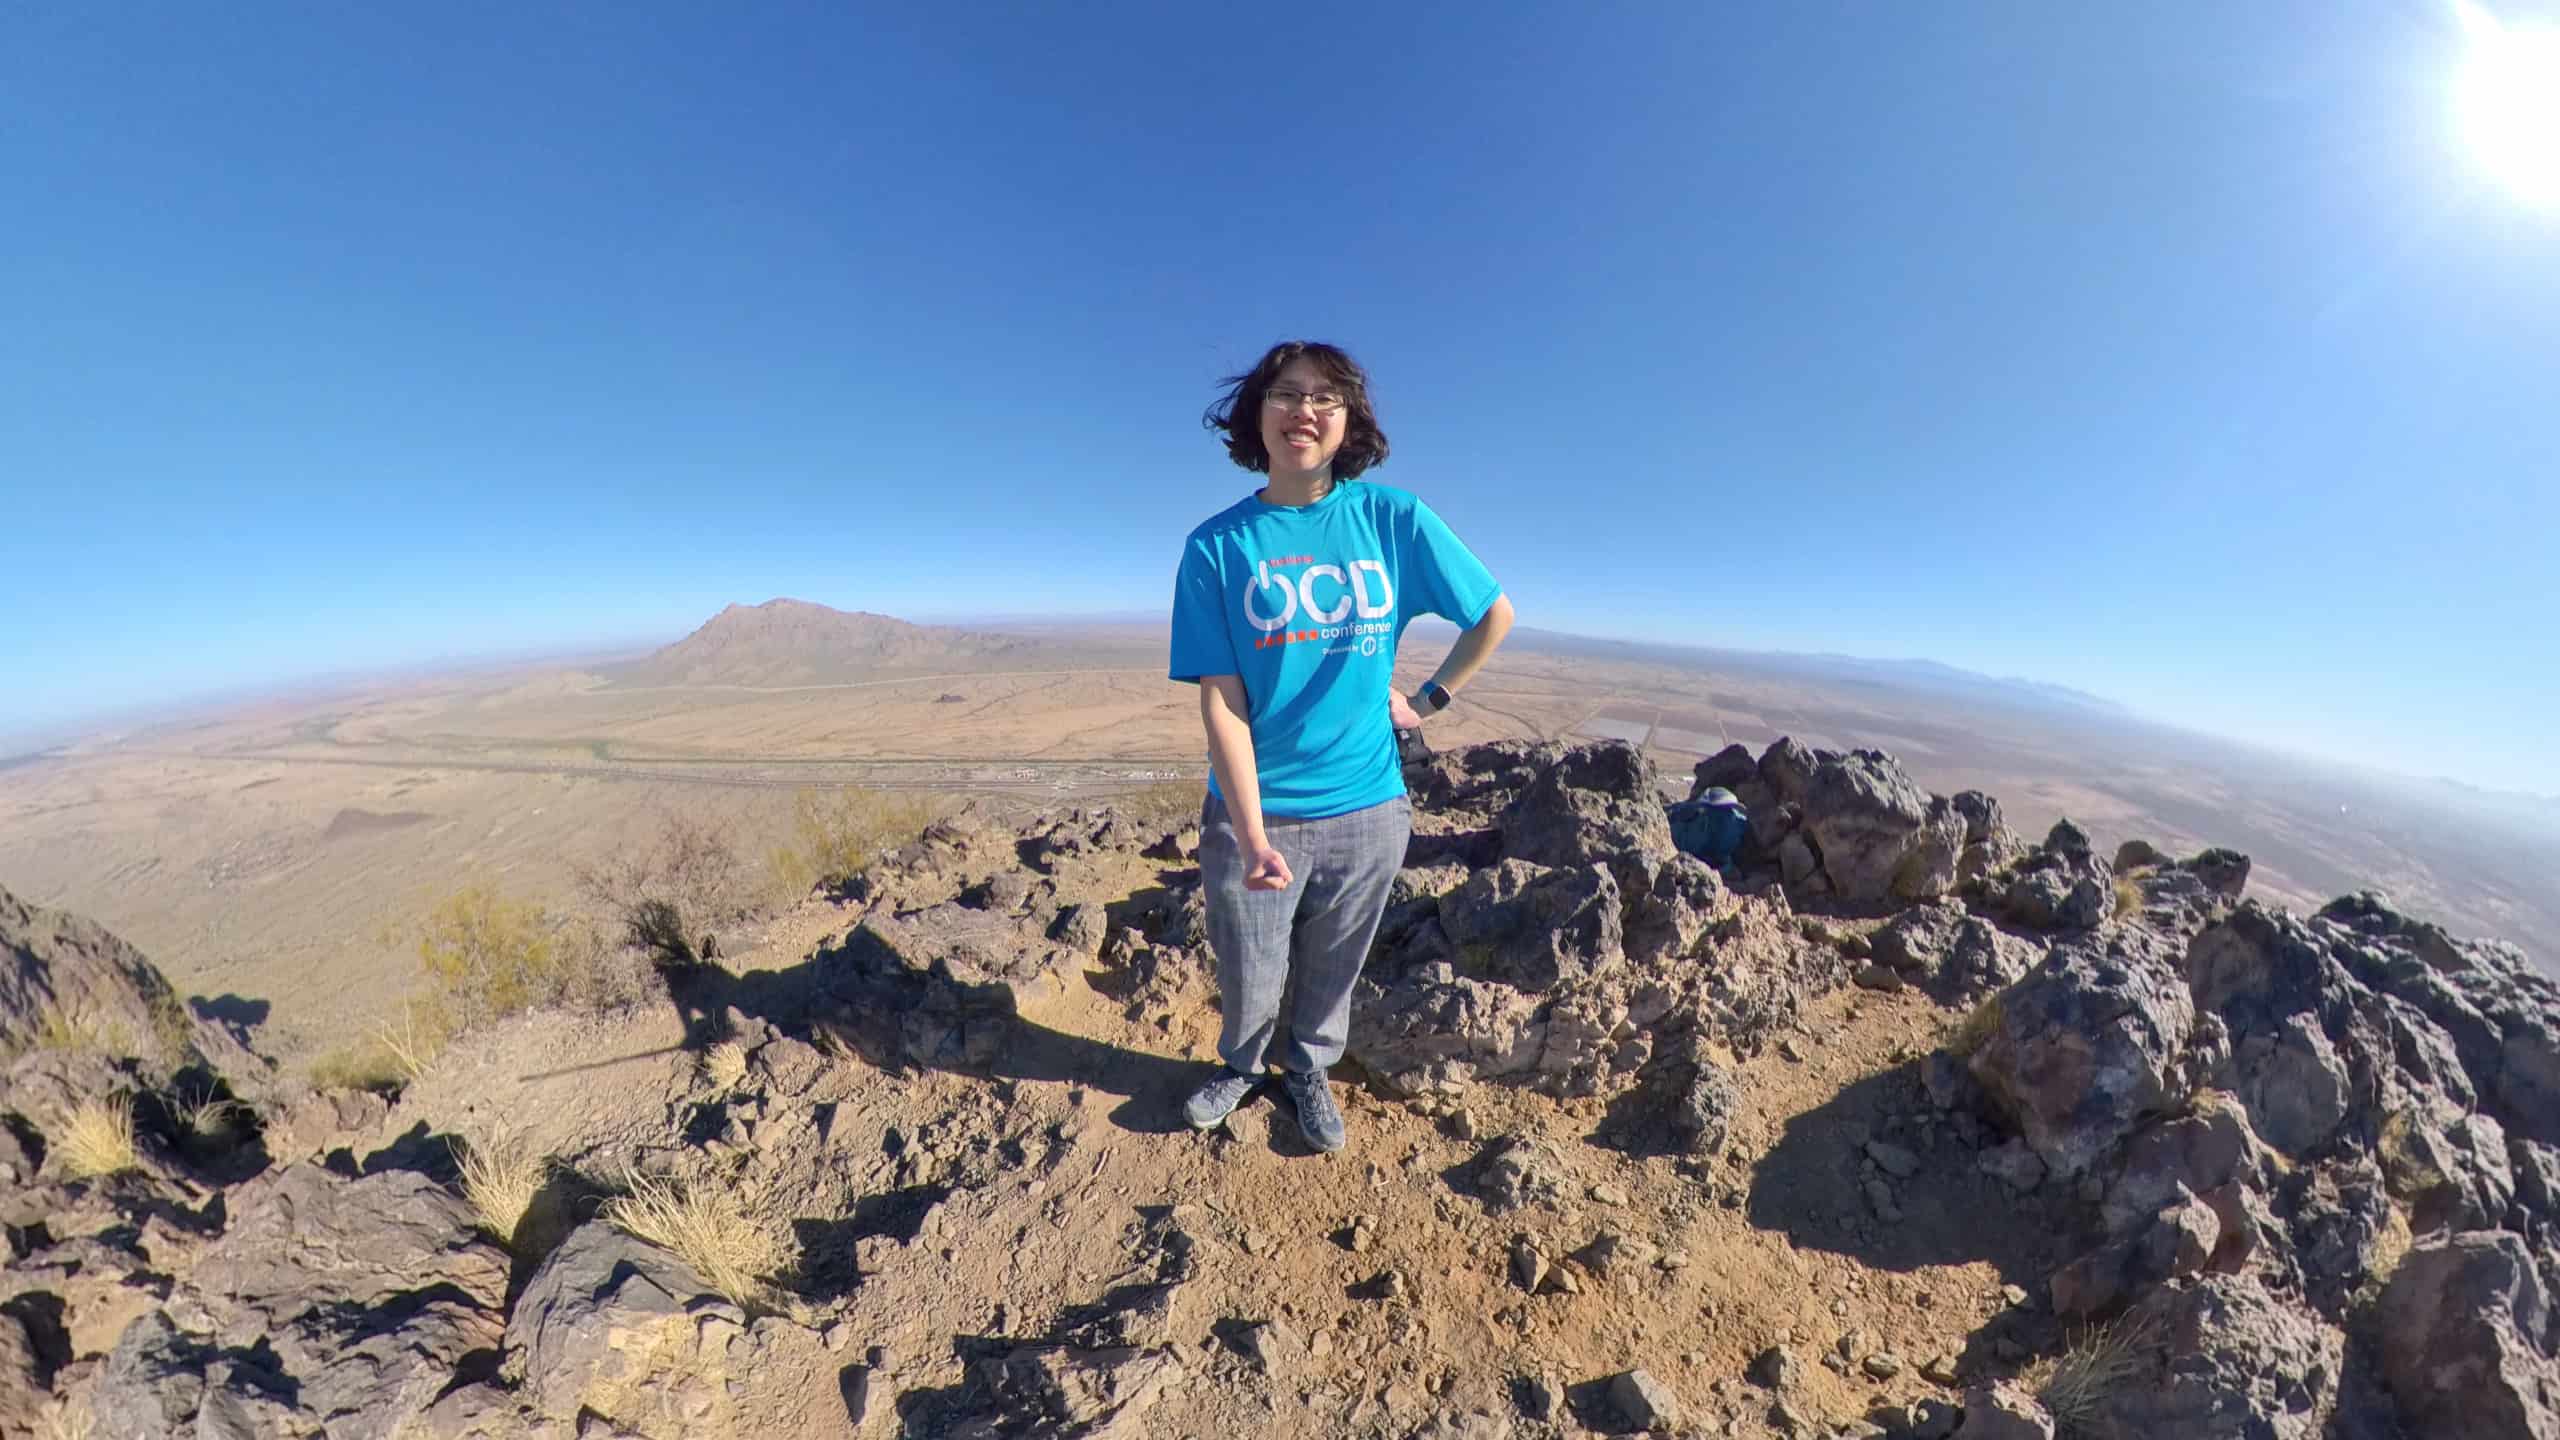 Meggie is wear a blue shirt that says "OCD" and has on red and black gloves. She is wearing a blue backpack and ballcap. She is standing on the mountain summit of Picacho Peak. Jagged rocks are next to her. Behind her is the vast brown desert, interstate 10, the railroad, and a clear blue sky. She is in Picacho Peak State Park between Tucson and Phoenix, Arizona, United States.